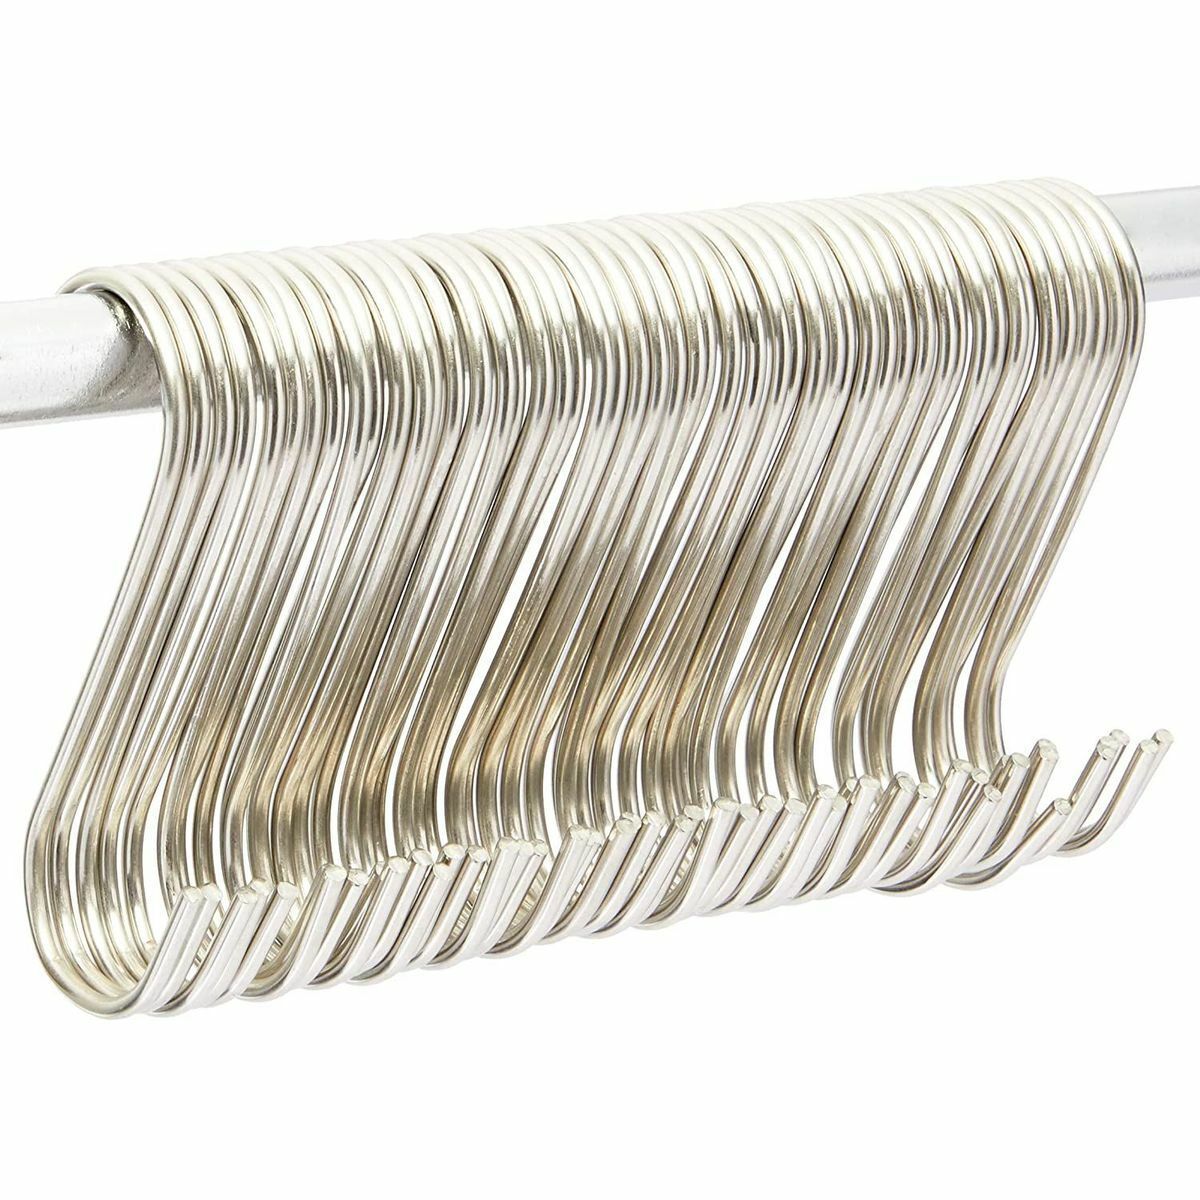 Primary image for Metal S Shaped Hooks, Stainless Steel Hangers Bulk Set (3.9 In, 50 Pack)